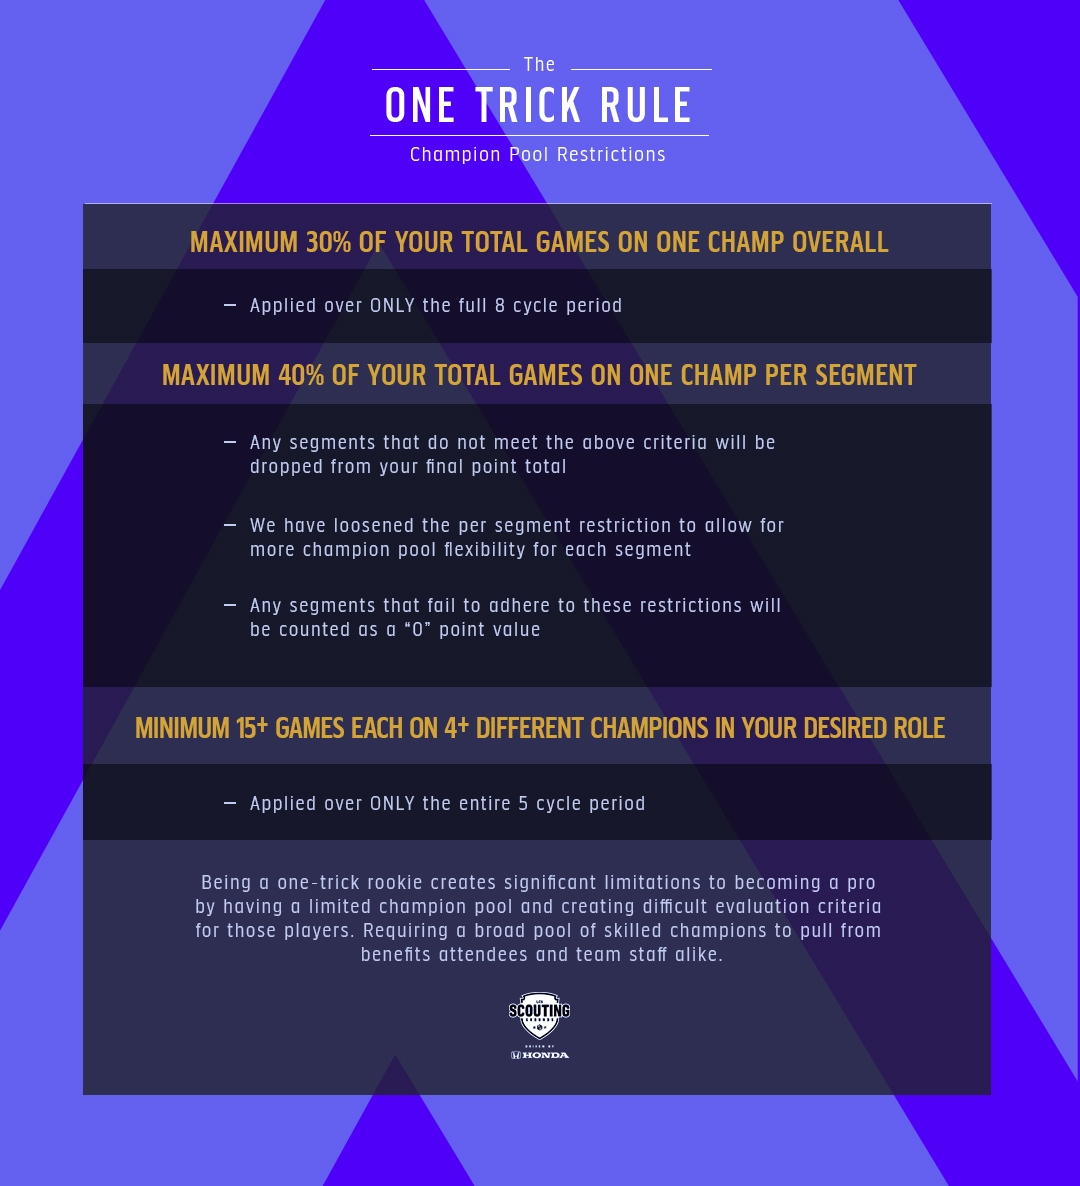 One trick rules